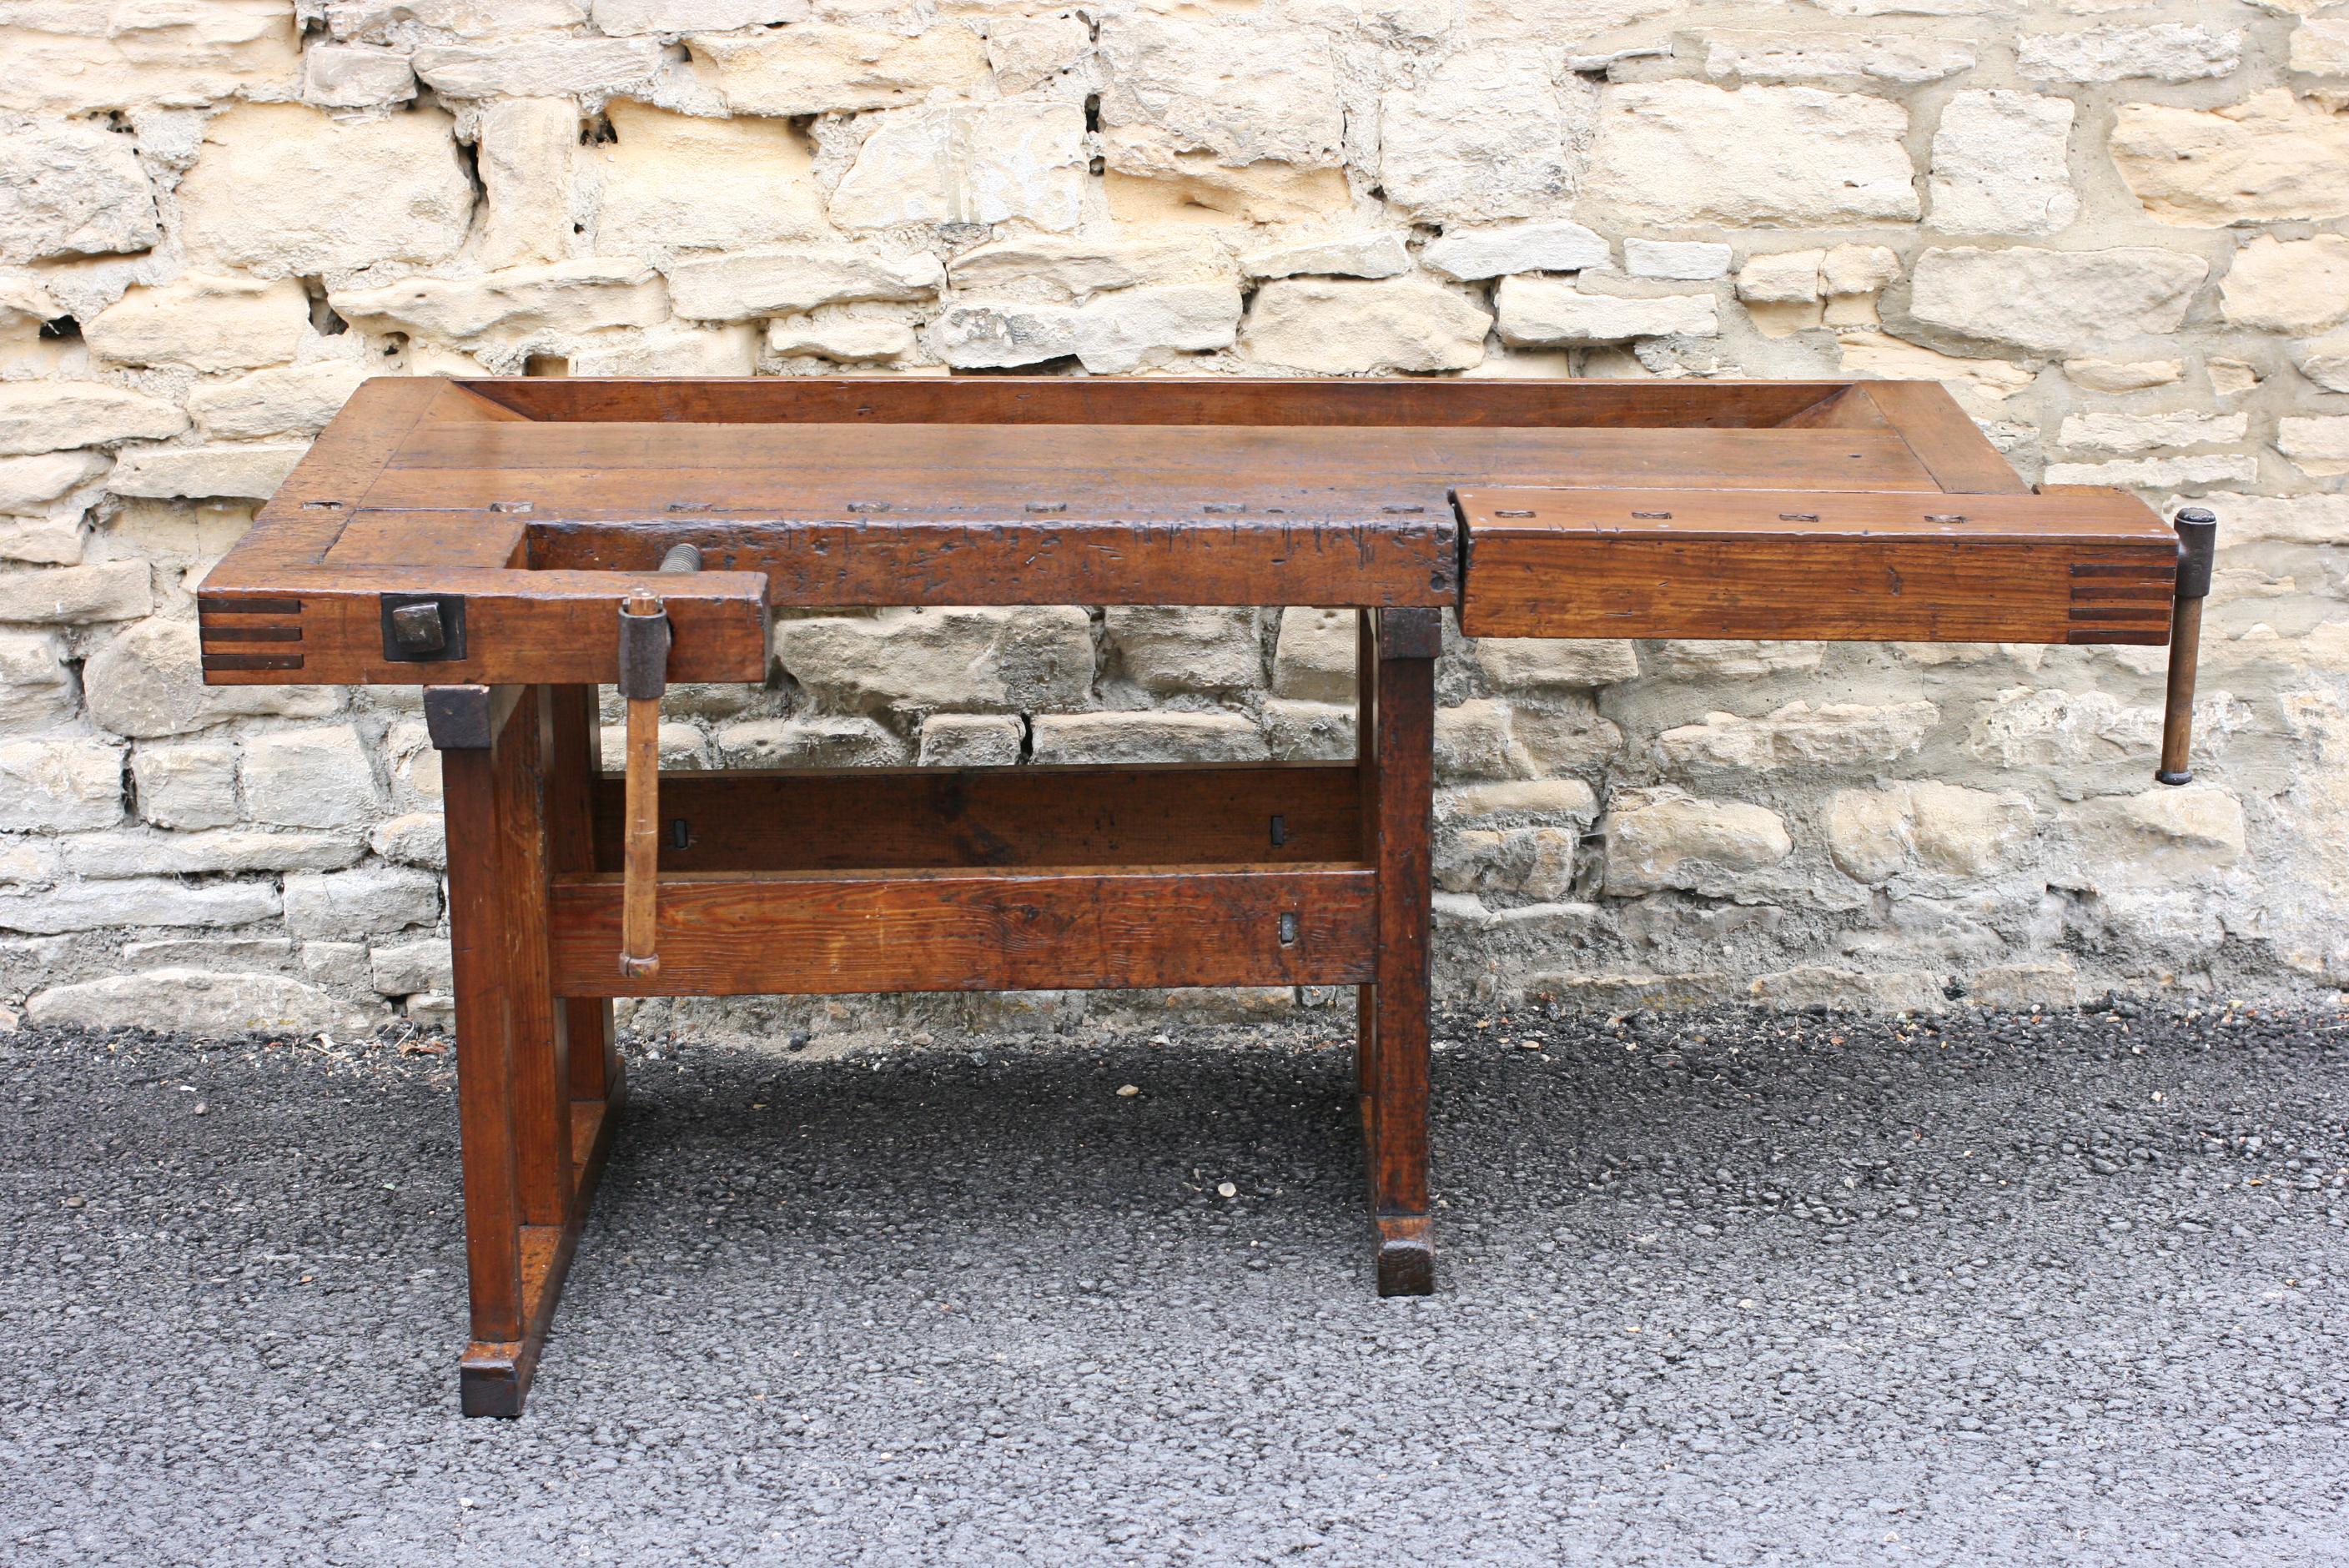 Antique carpenter's workbench.
A wonderful work bench with solid beechwood top and pine legs. The bench has two vices with metal threads, one on the front edge and the other on the right hand side. The top leading edge is drilled with square holes